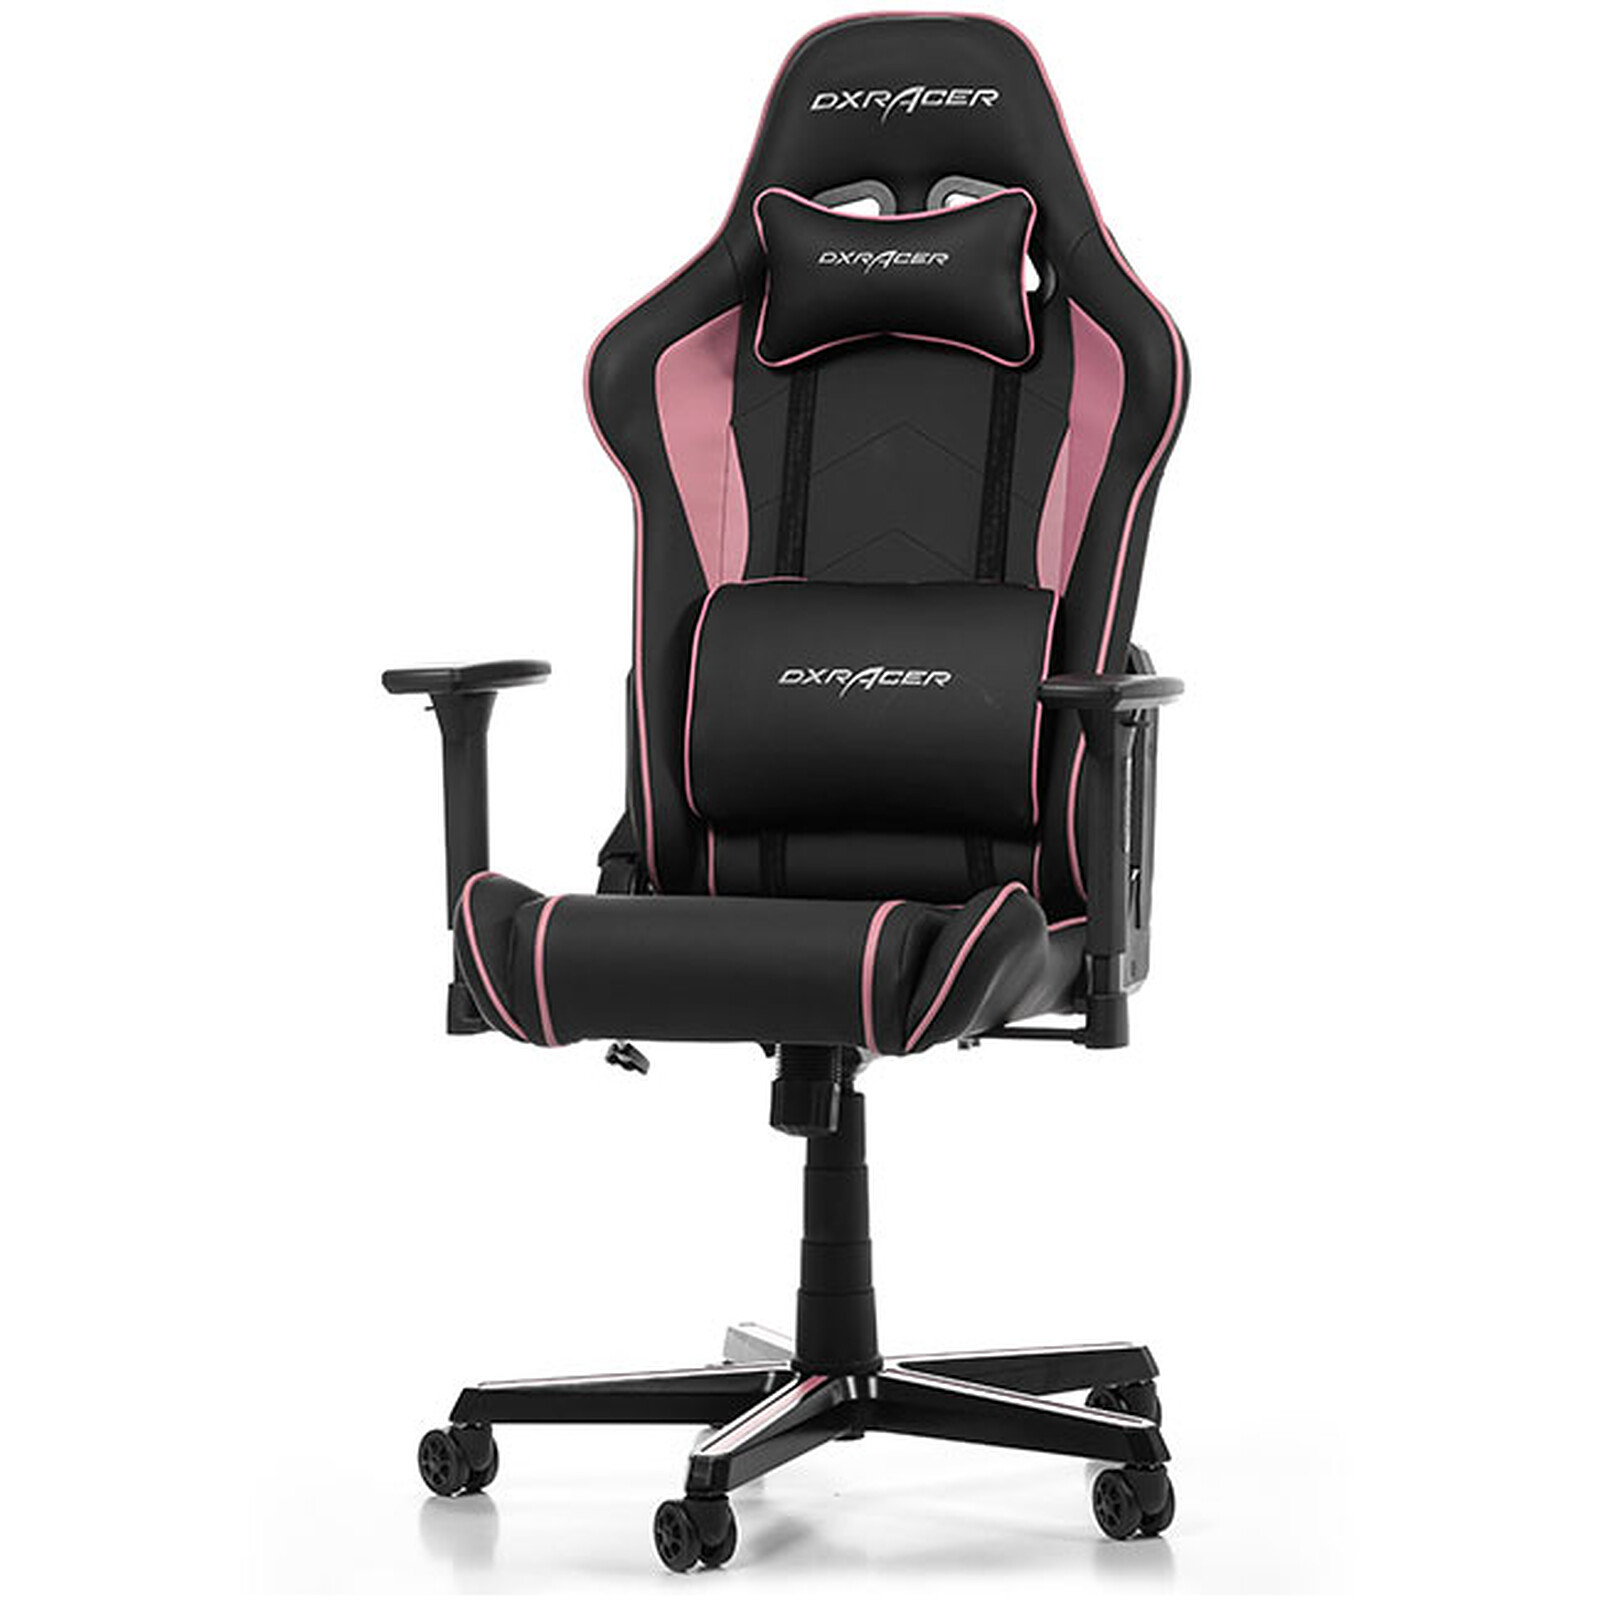 DXRacer Prince P08 (pink) - Gaming chair - LDLC 3-year warranty